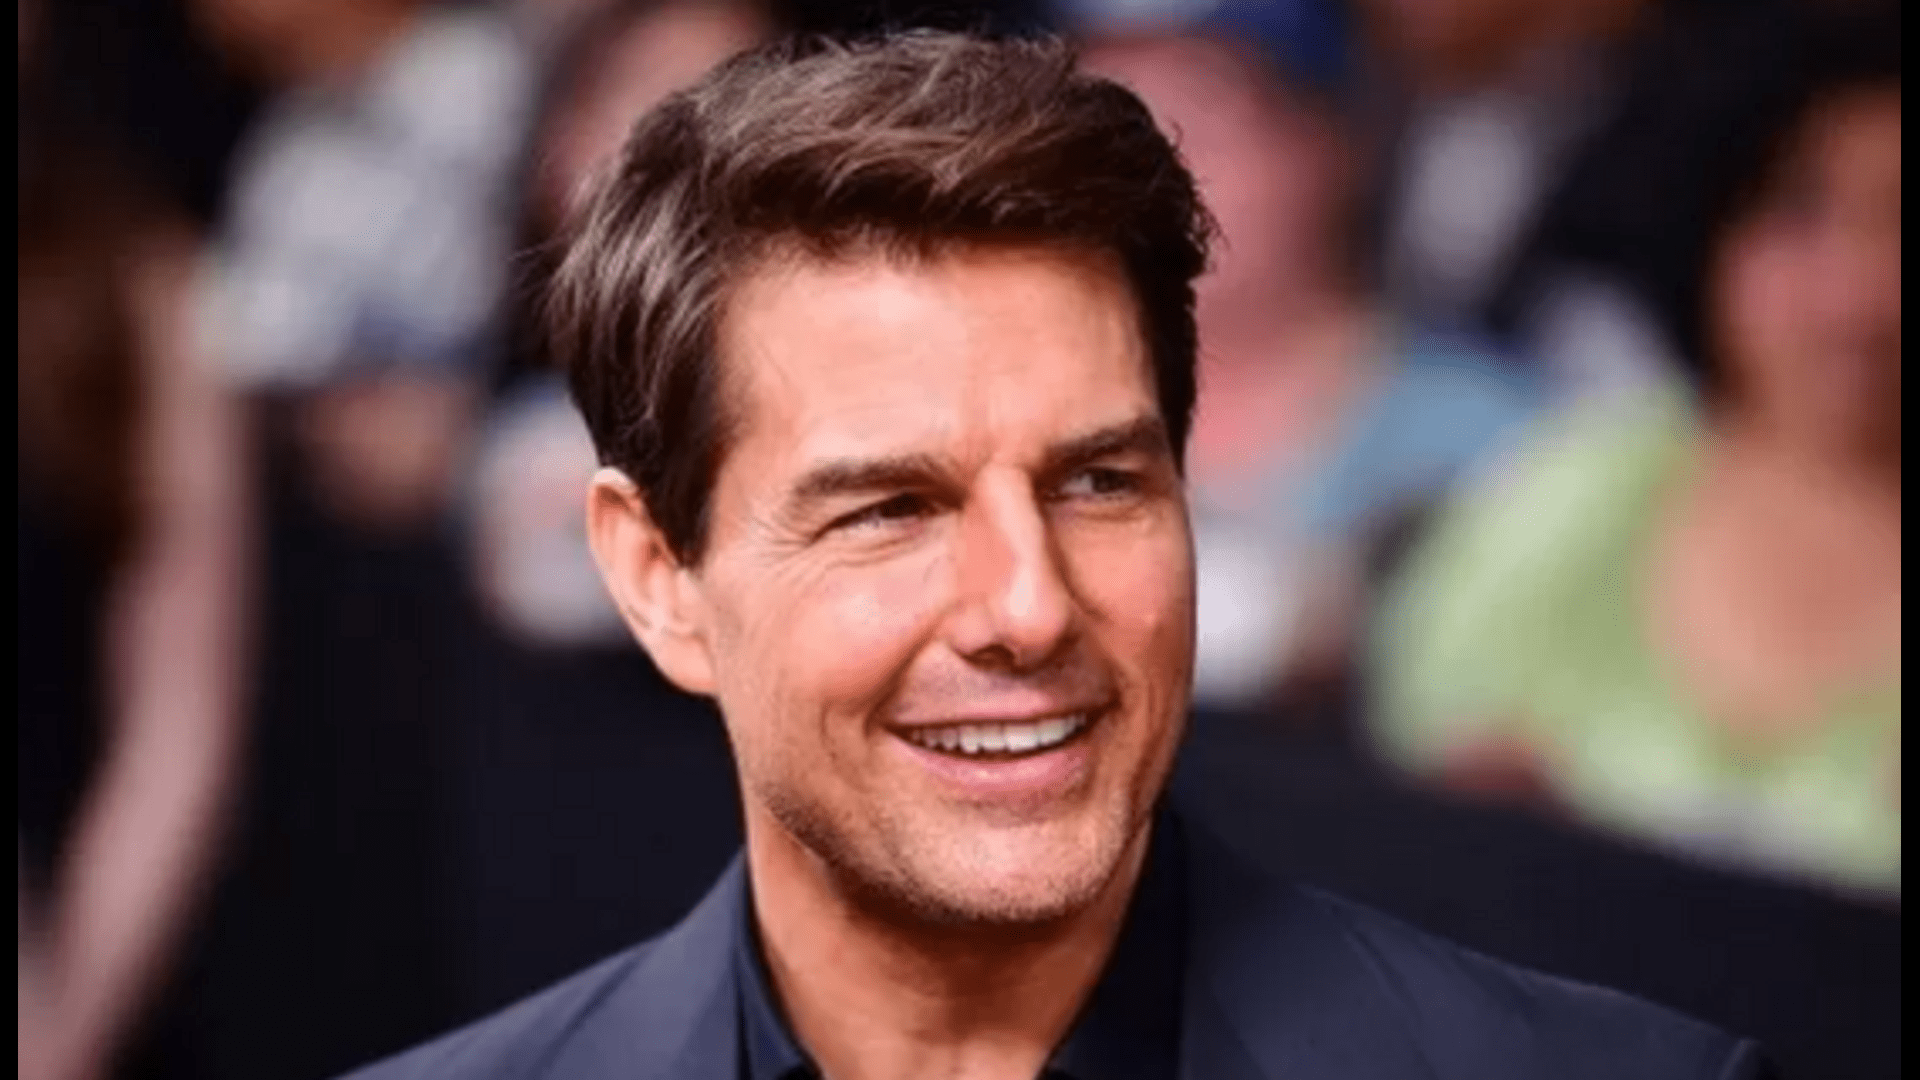 Tom Cruise will be back before he can leave. Filming has begun on the eighth installment of the Mission: Impossible franchise.